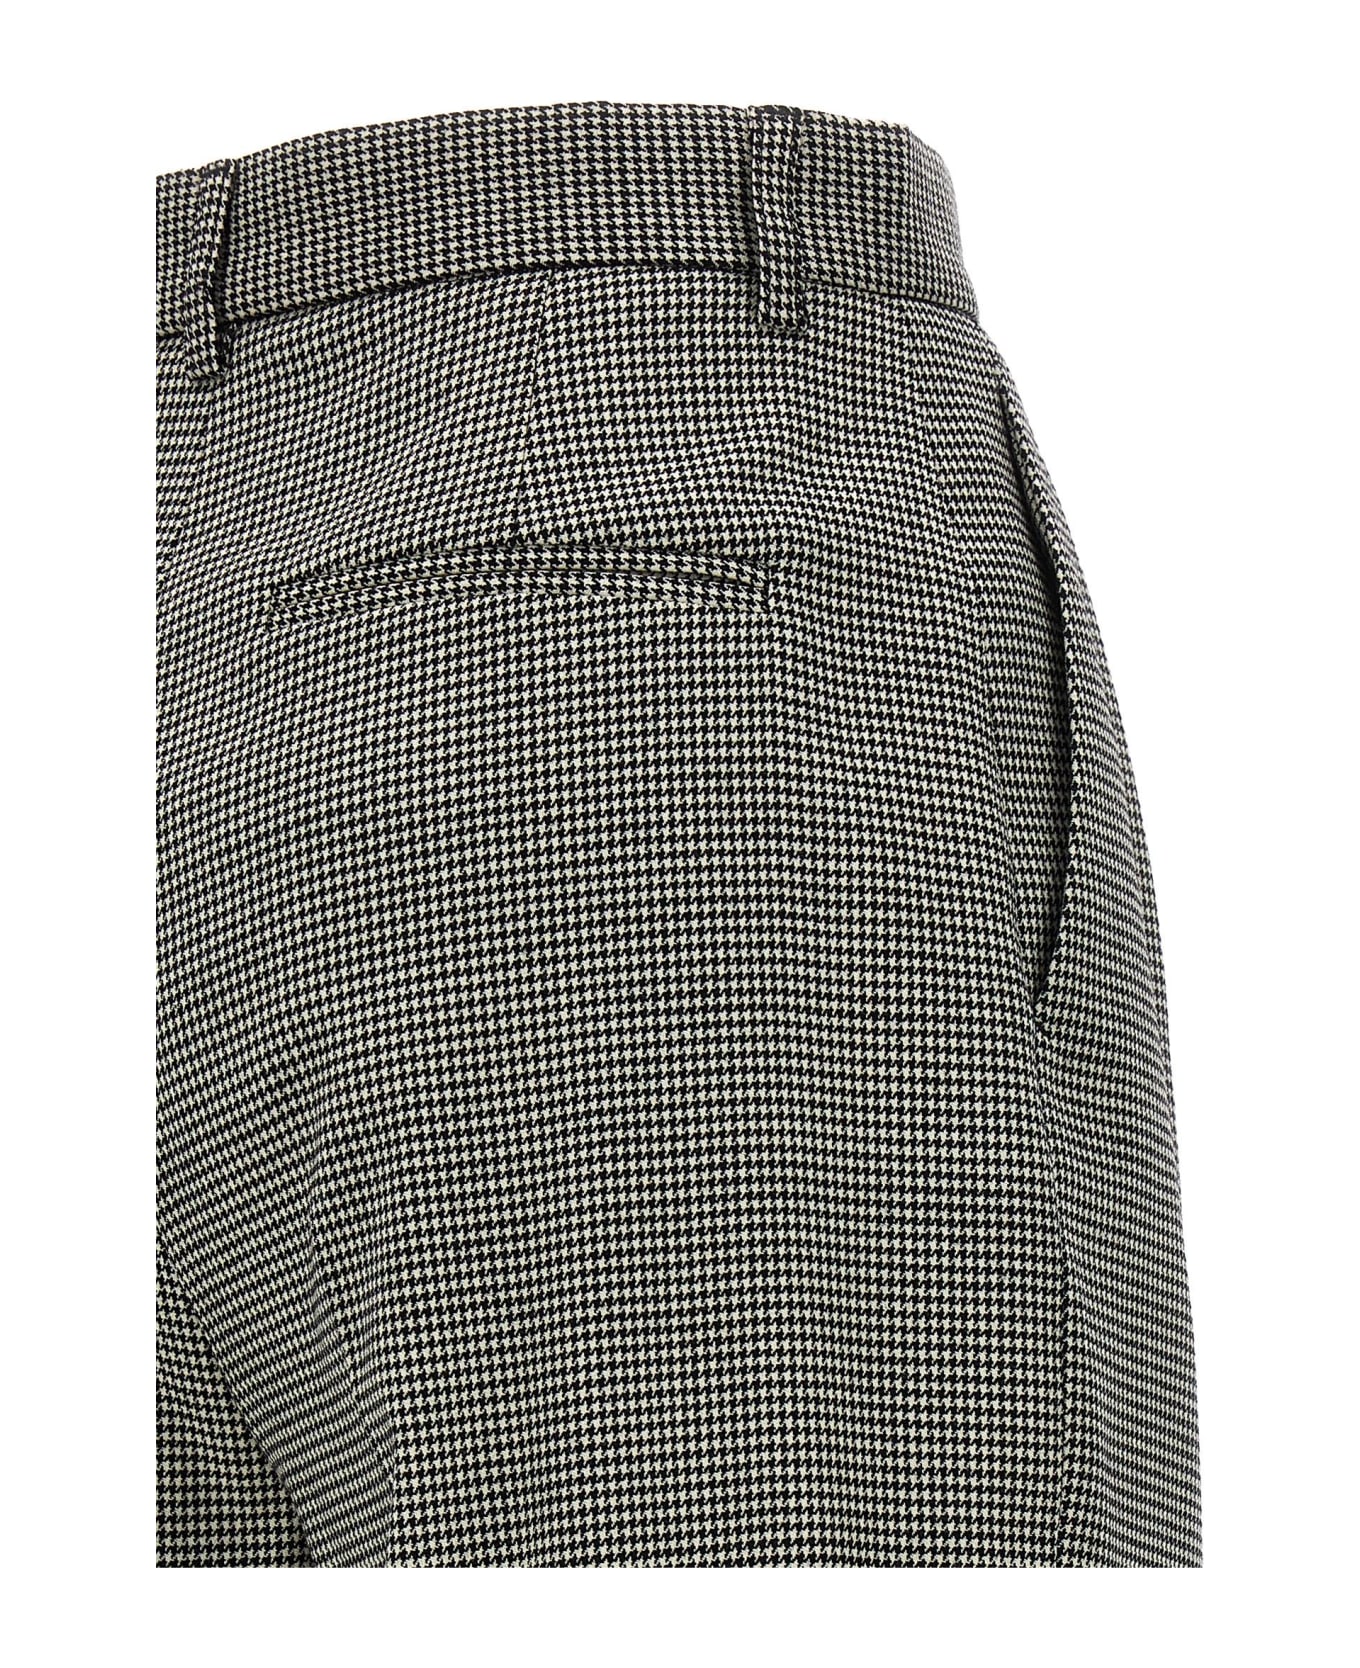 Rochas Houndstooth Pants - White/Black